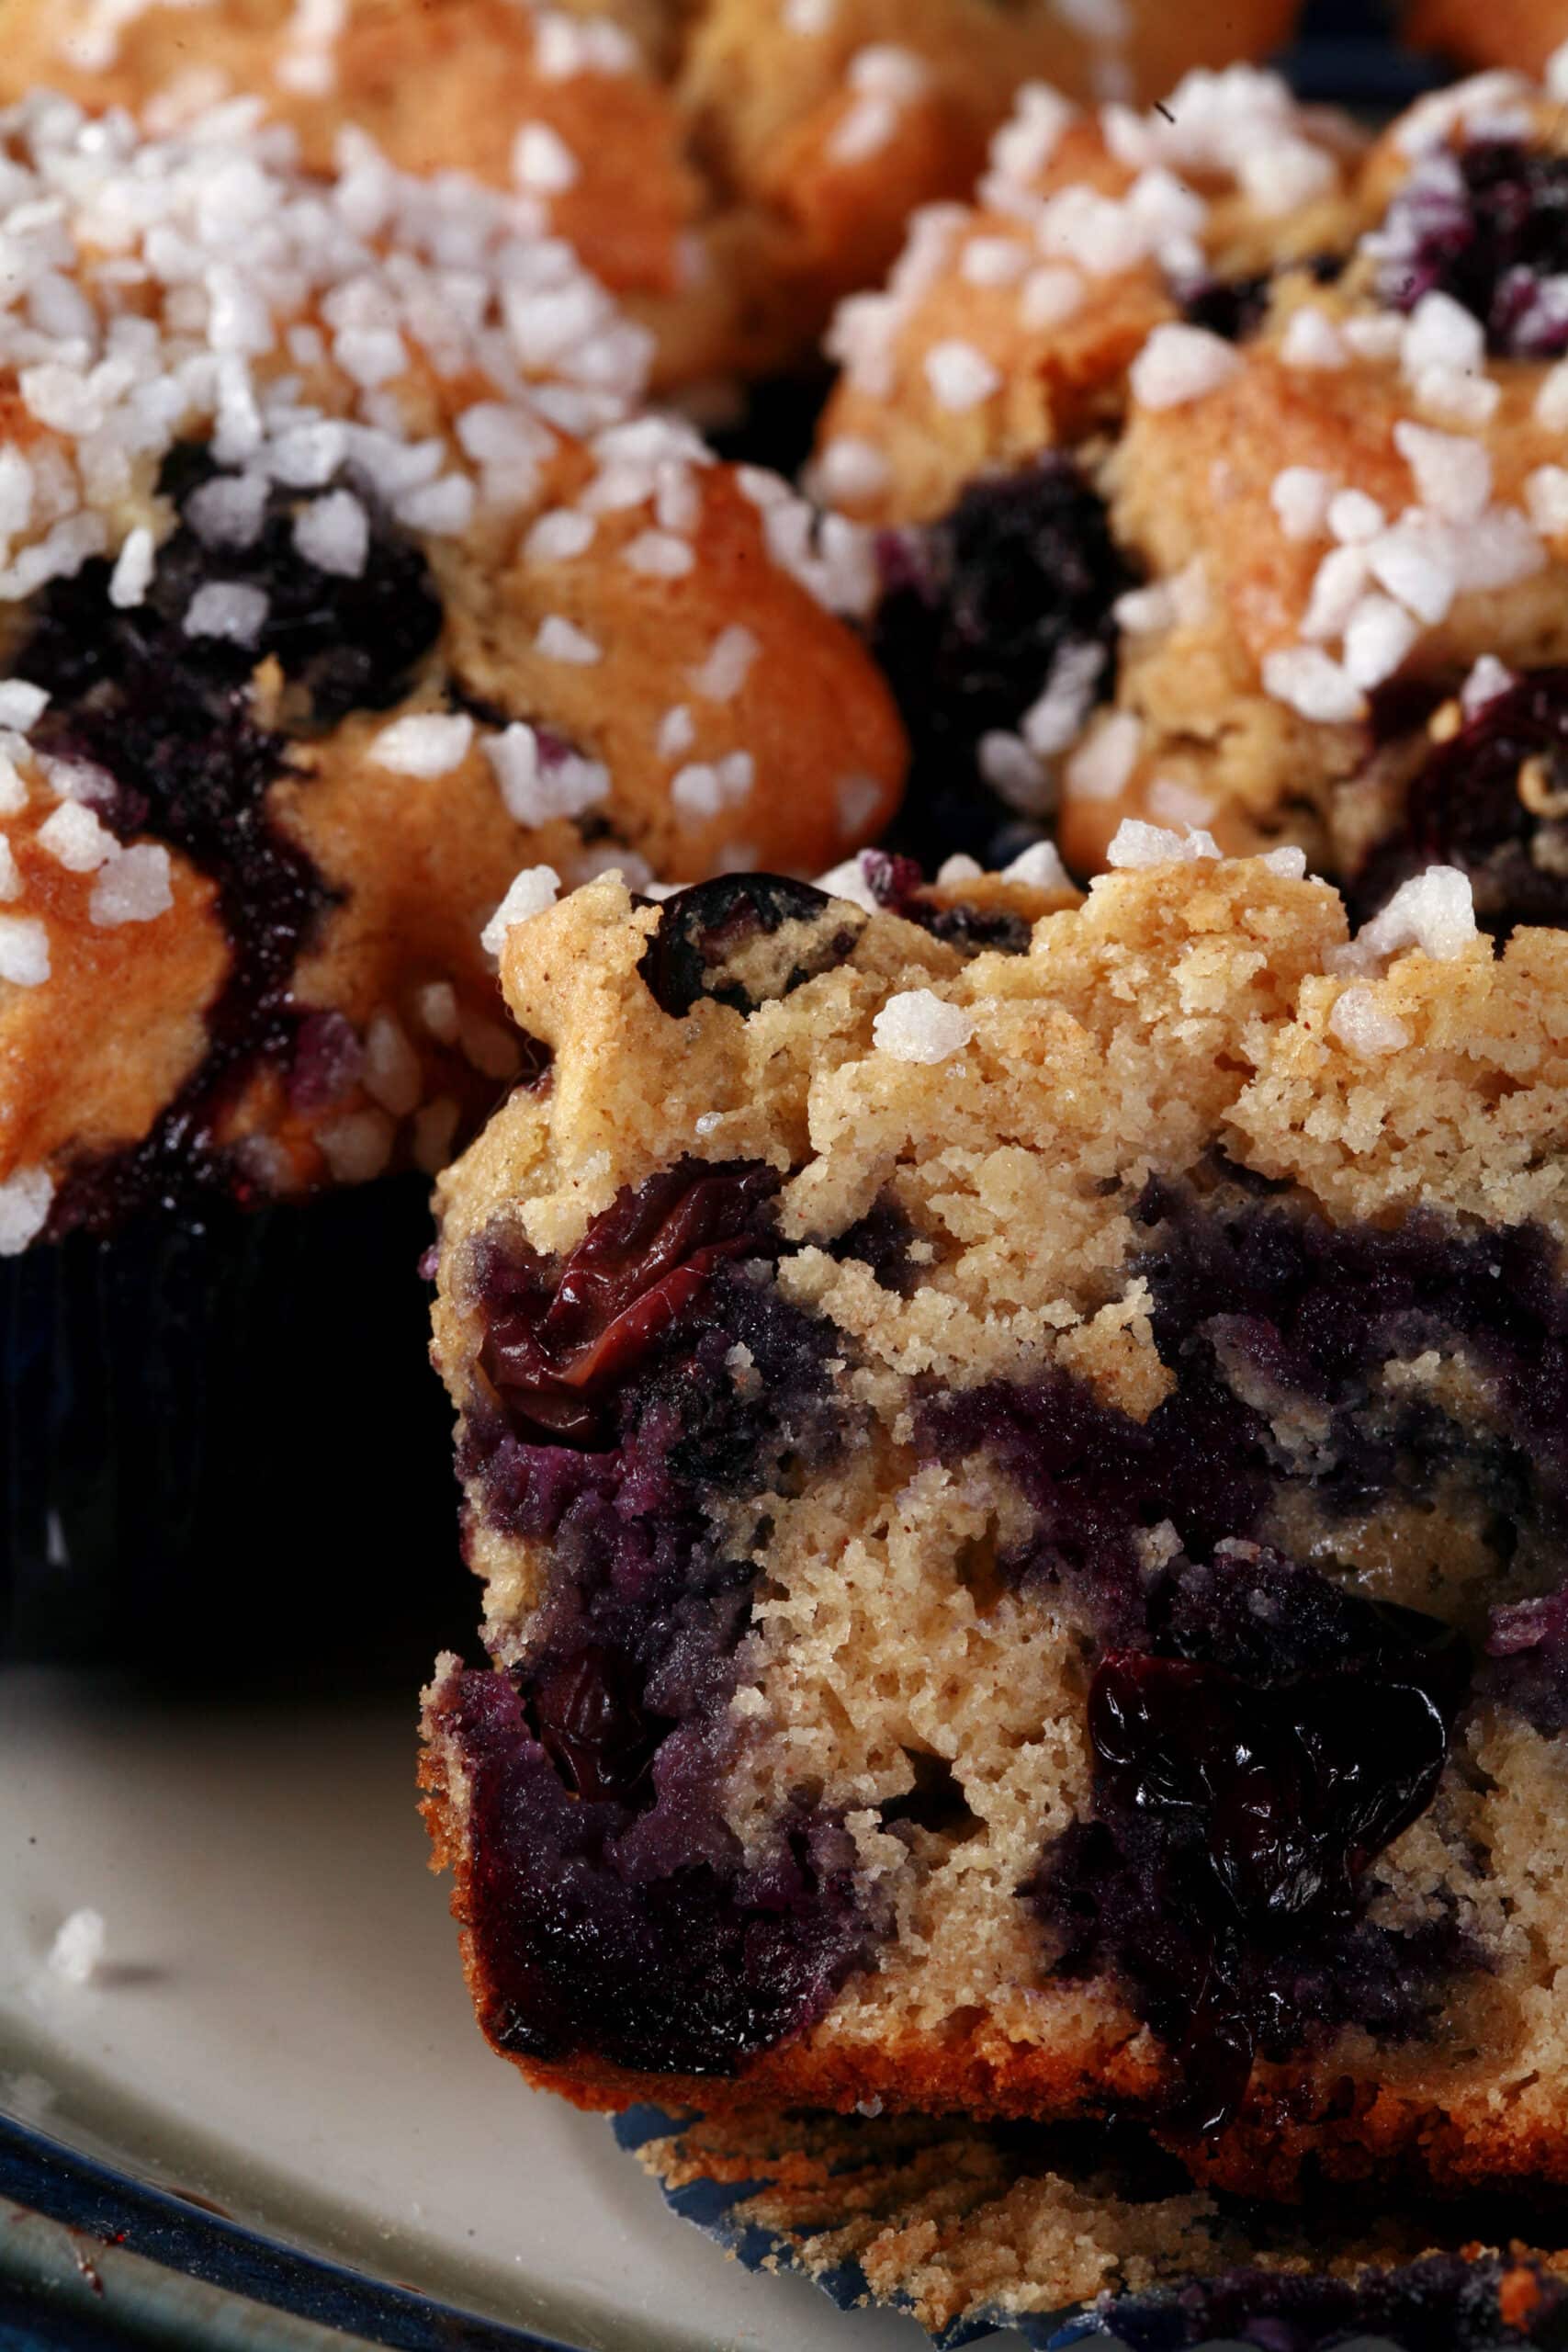 Several sugar topped gluten-free blueberry muffins on a plate.